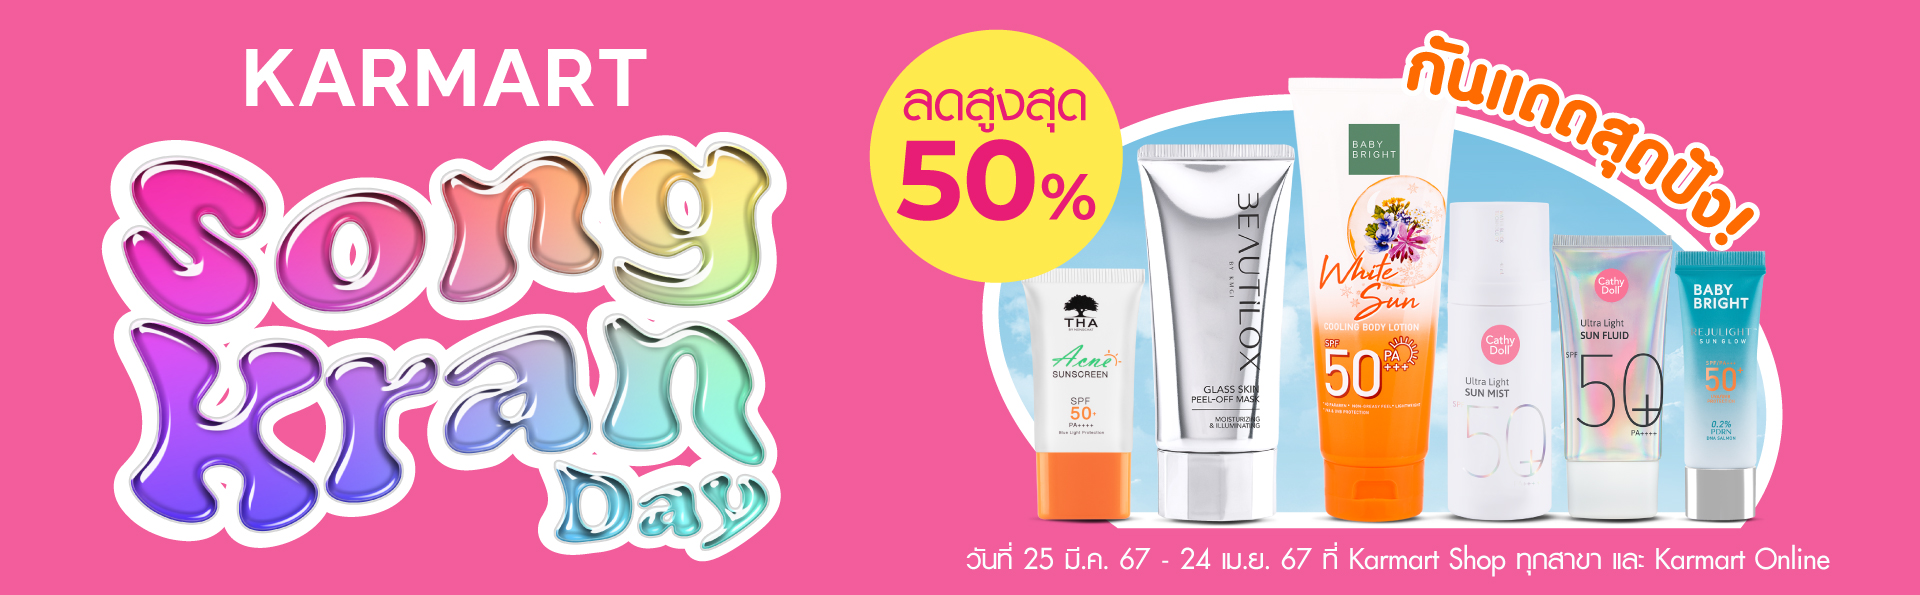 Songkran Day Sale up to 50%